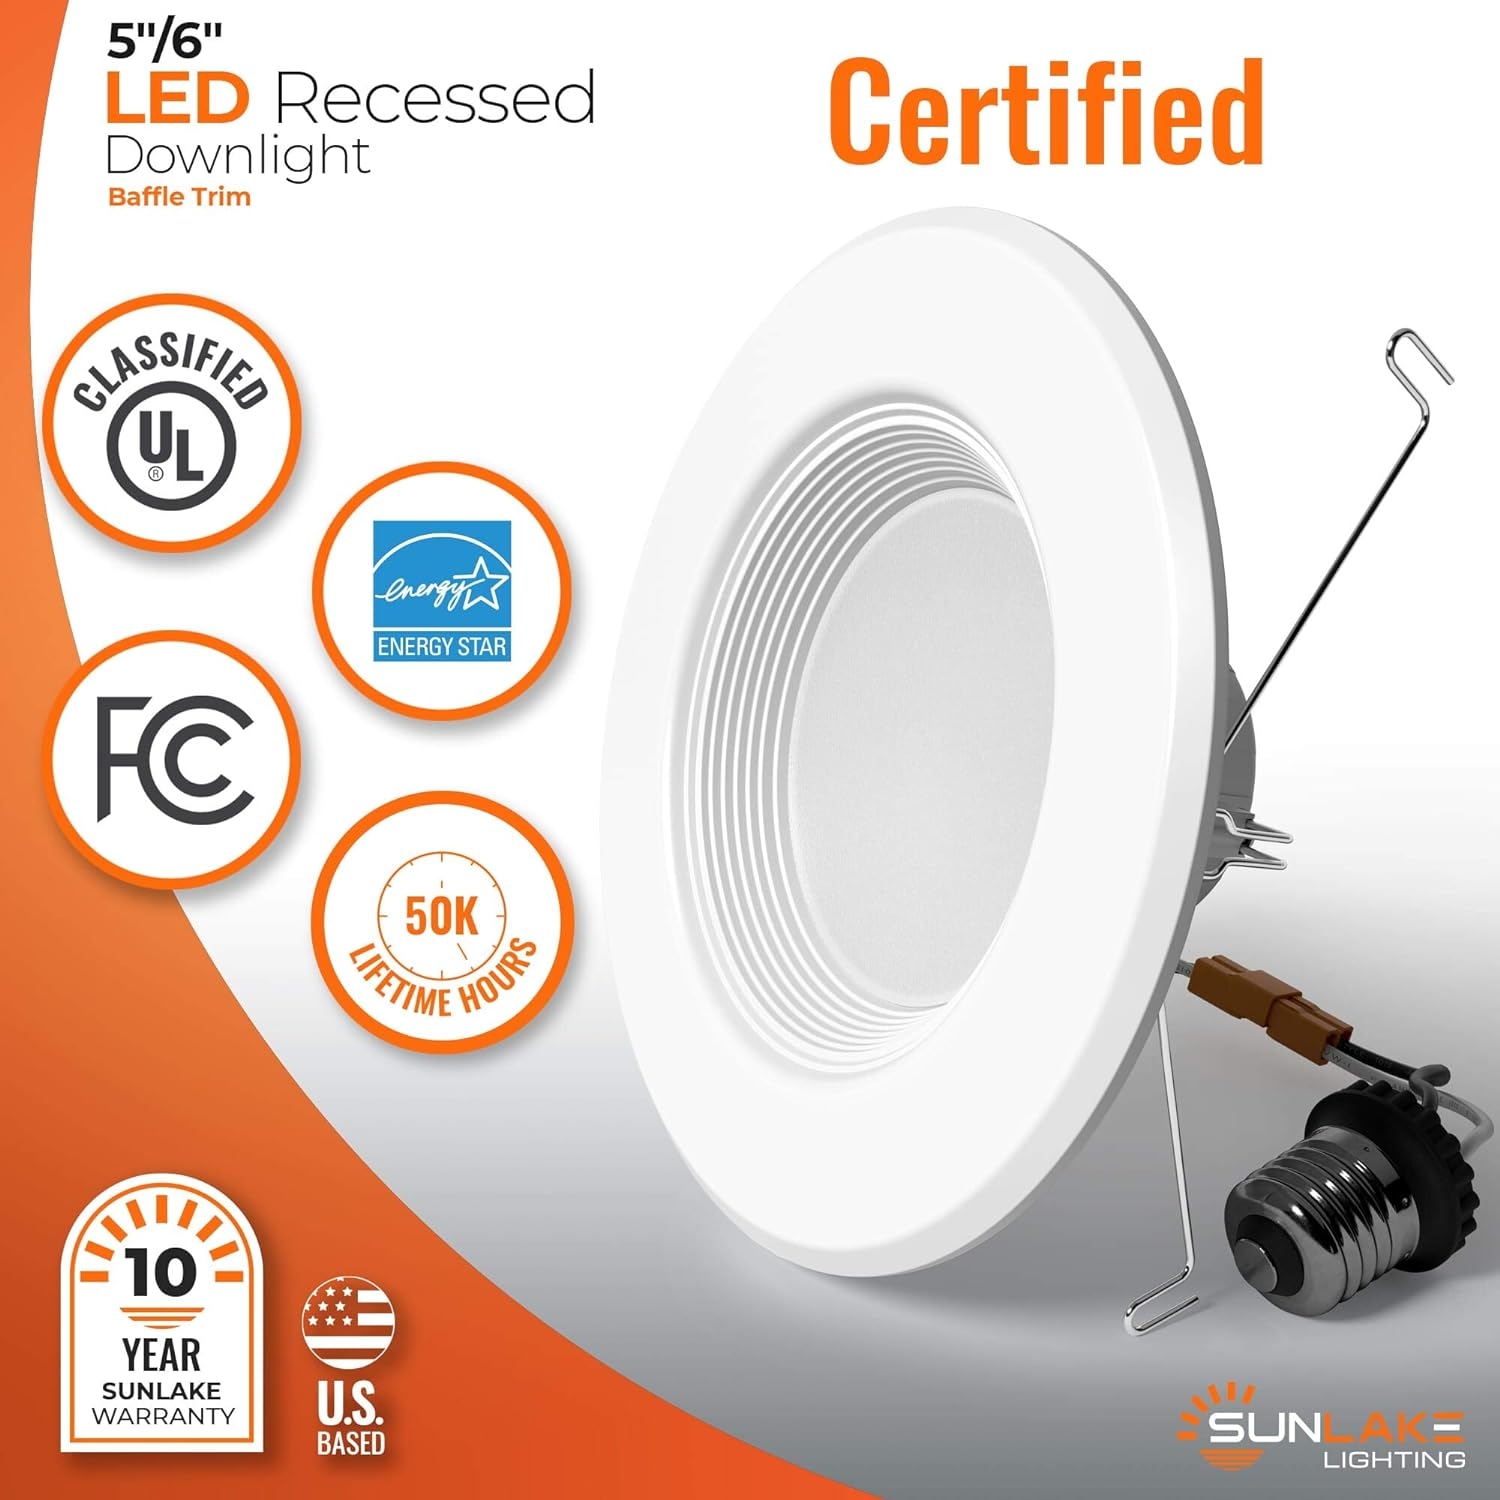 SunLake Lighting 12 Pack 5/6 Inch LED Recessed Downlight, Baffle Trim, Dimmable, 4000K Cool White, 12W=75W, 1080 LM, Wet Rated Waterproof, Retrofit Kit, UL + Energy Star